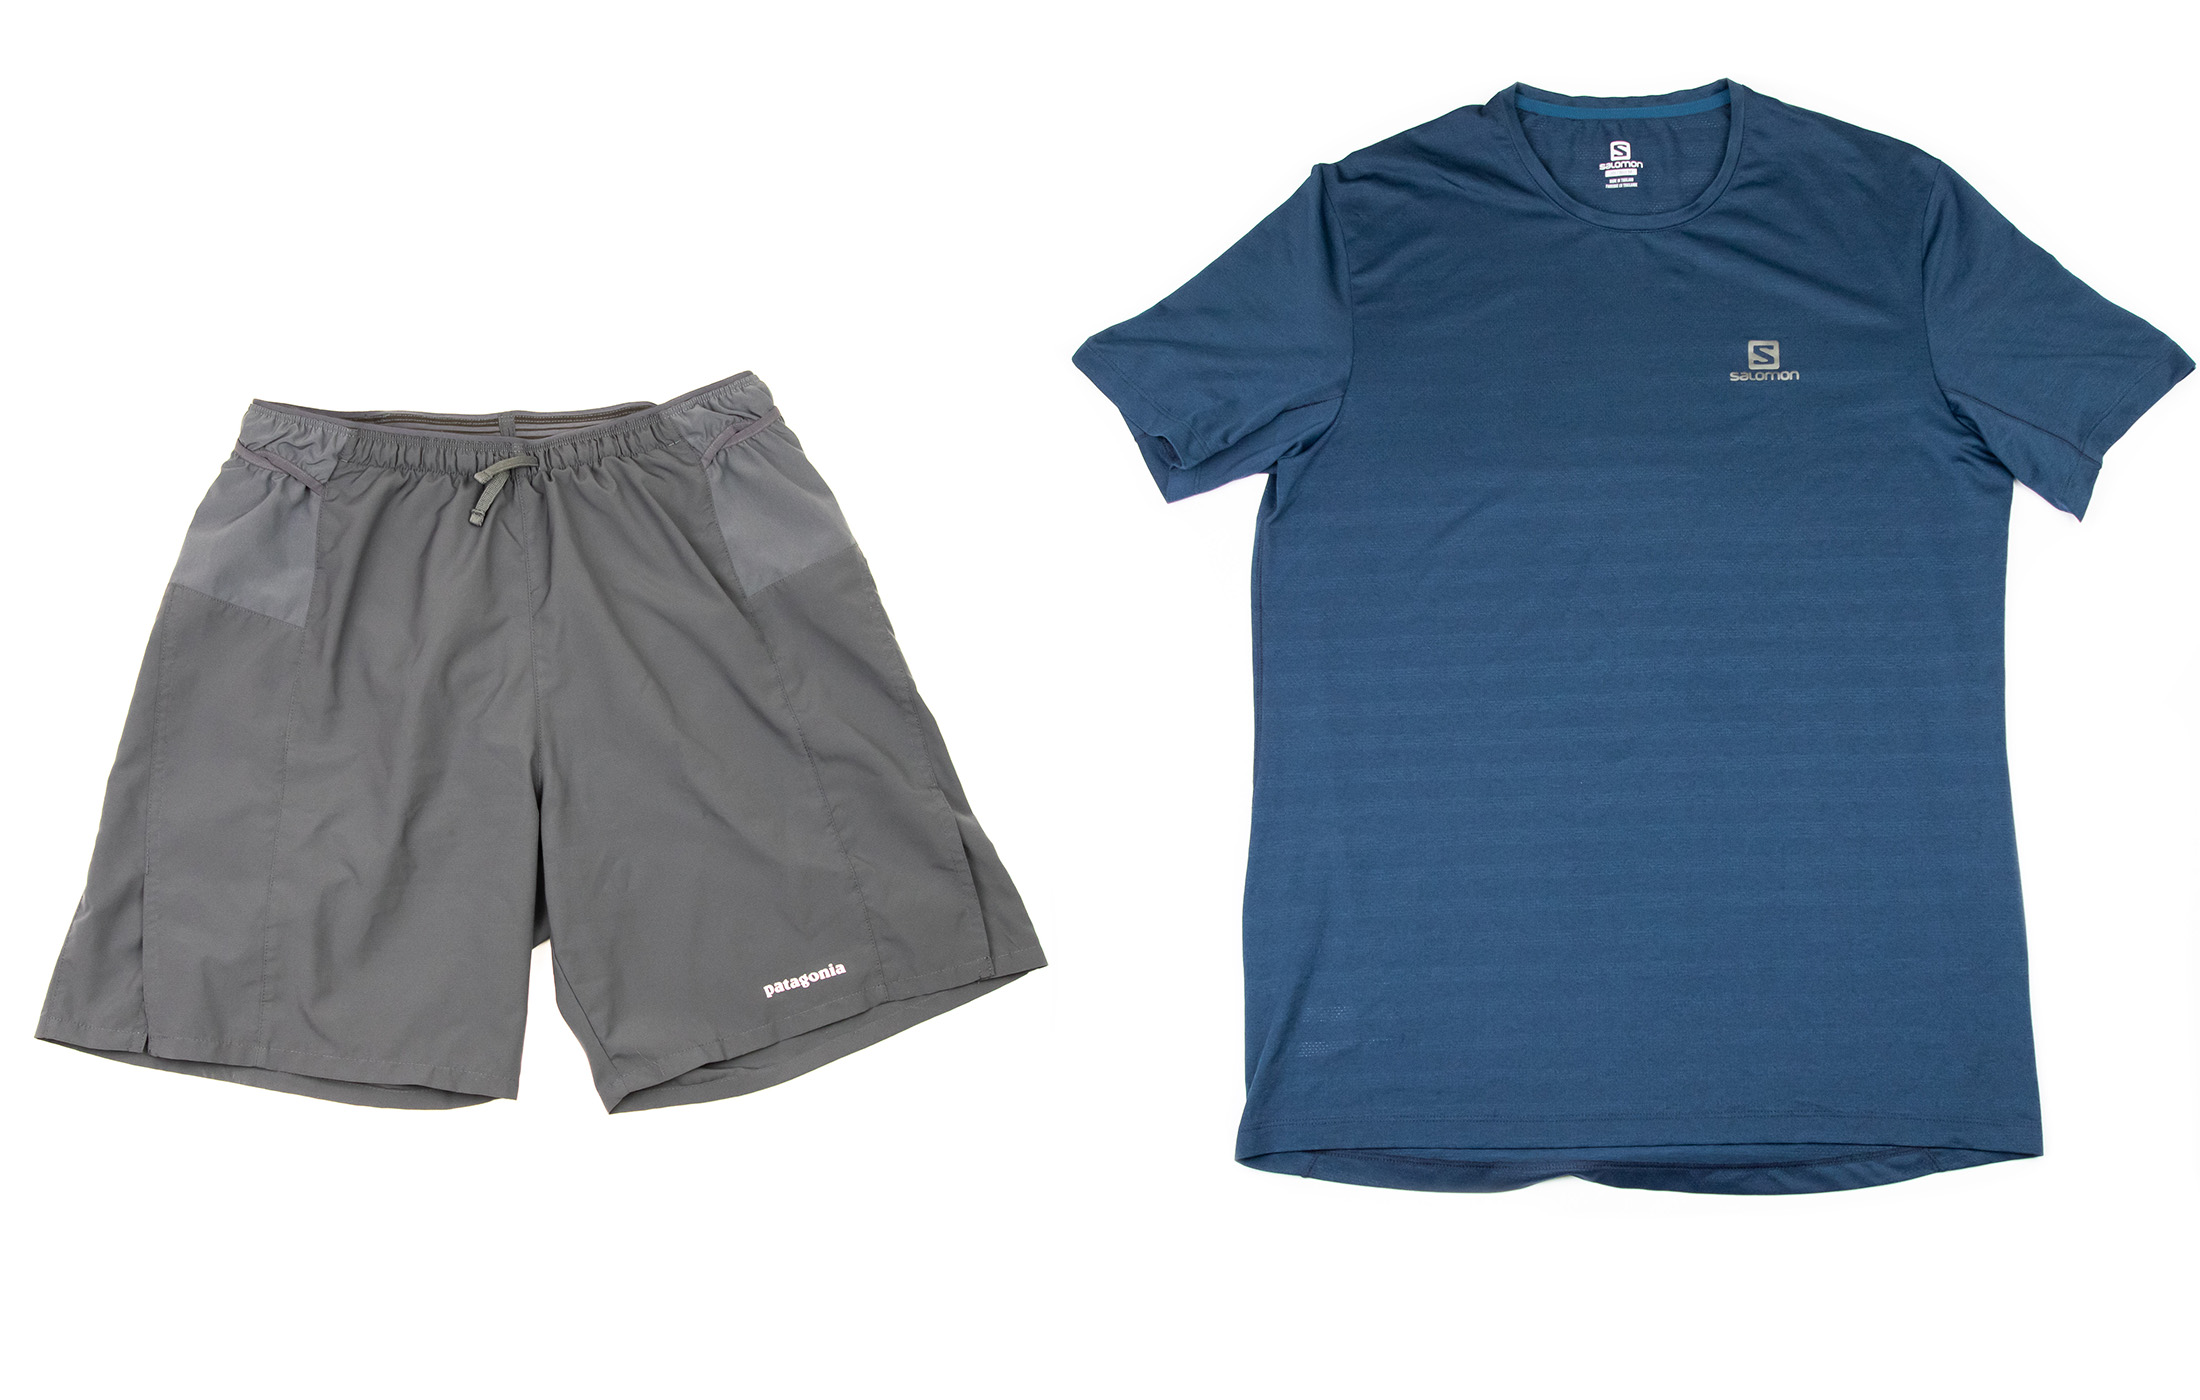 shorts and T-shirt for running